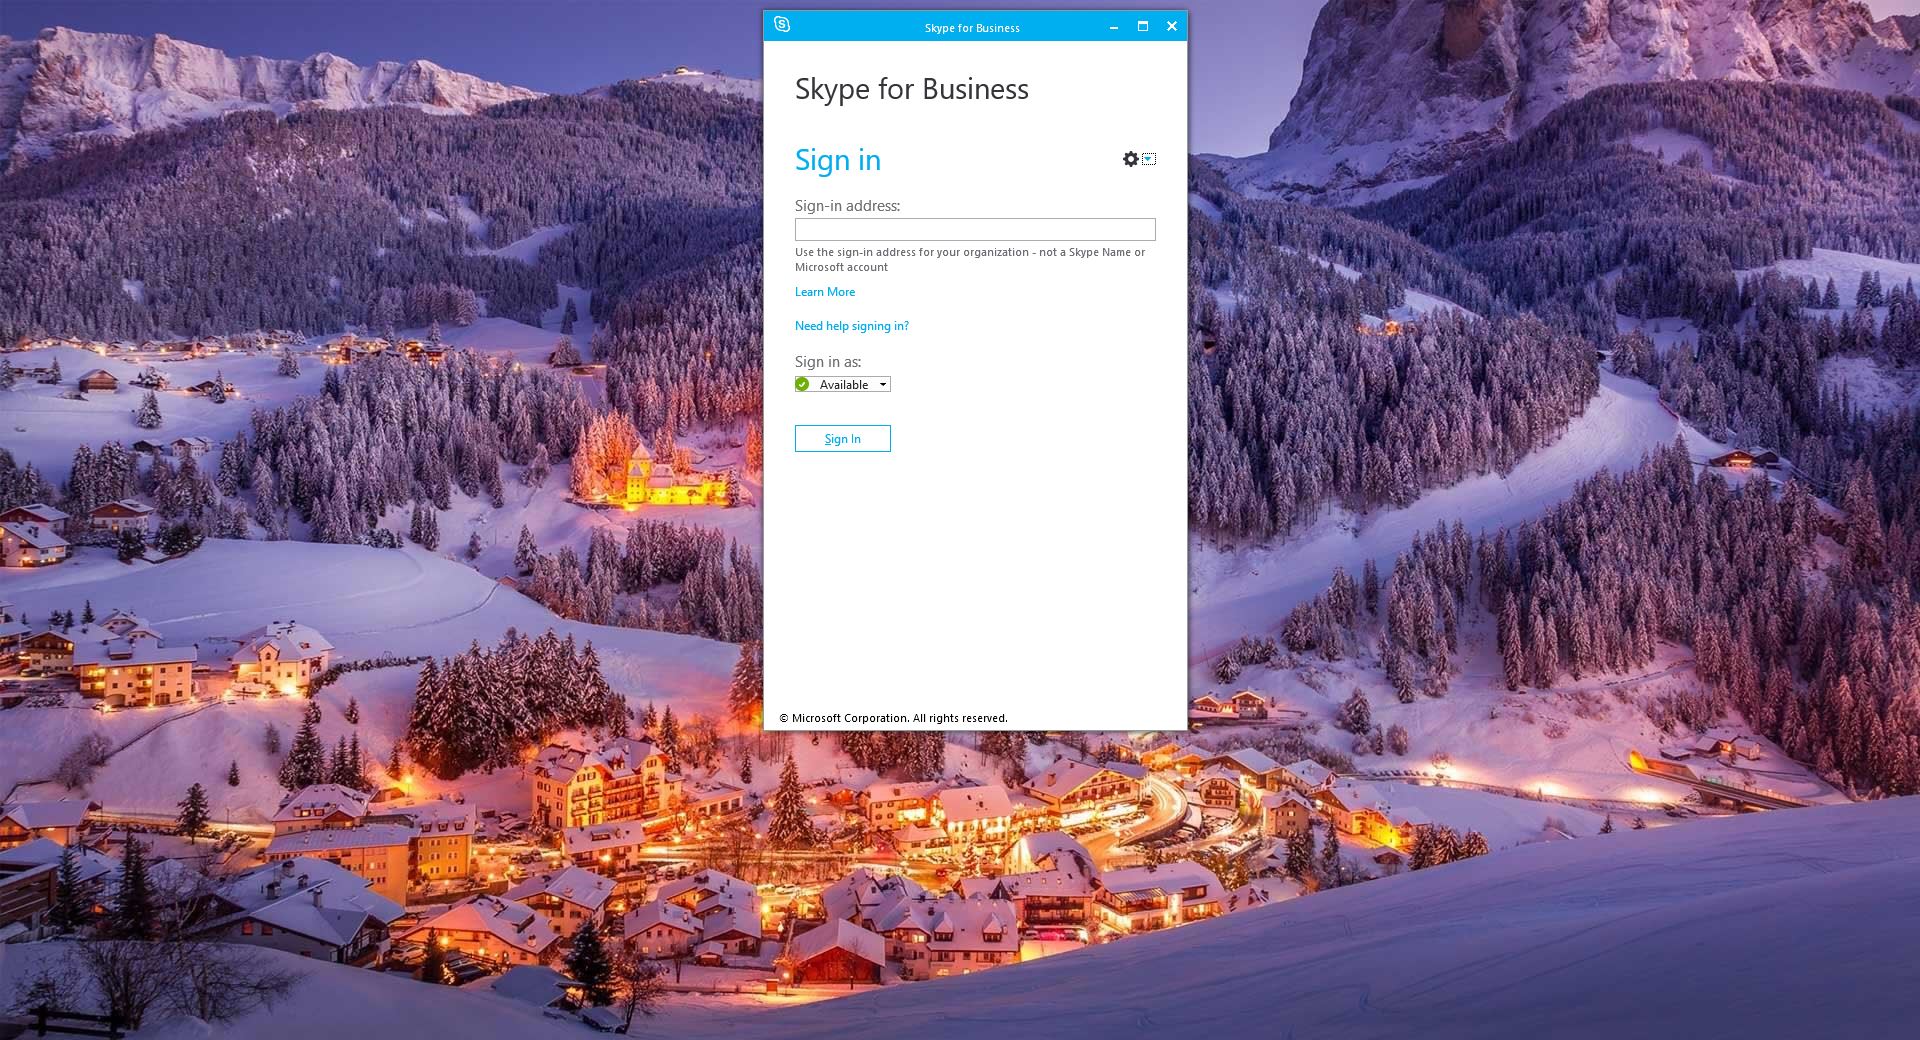 How to Uninstall Skype for Business from office 2013/2016/O365?